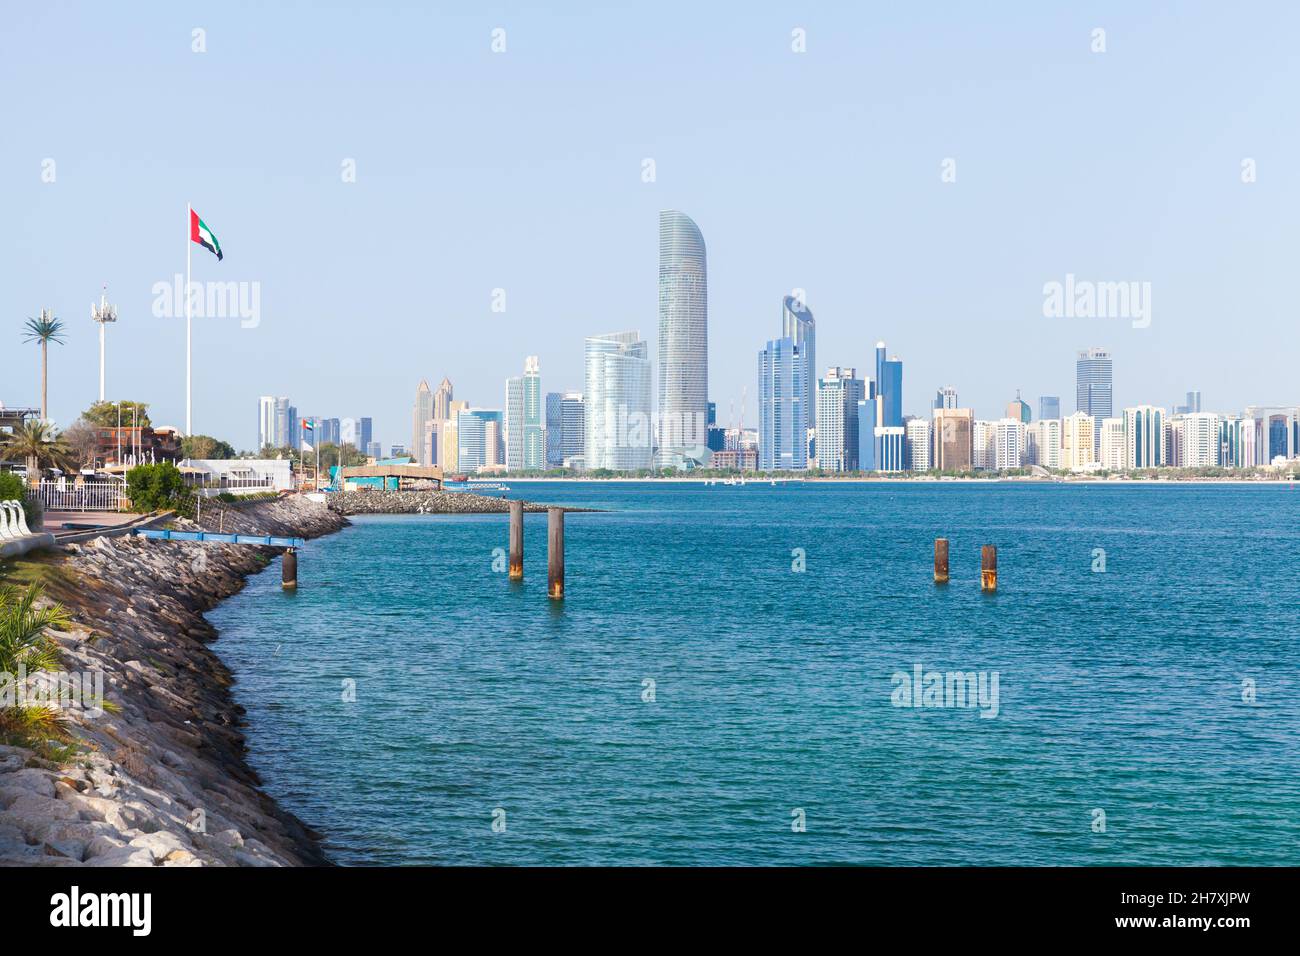 Abu Dhabi, cityscape with tall skyscrapers towers under clear blue sky on a sunny day Stock Photo